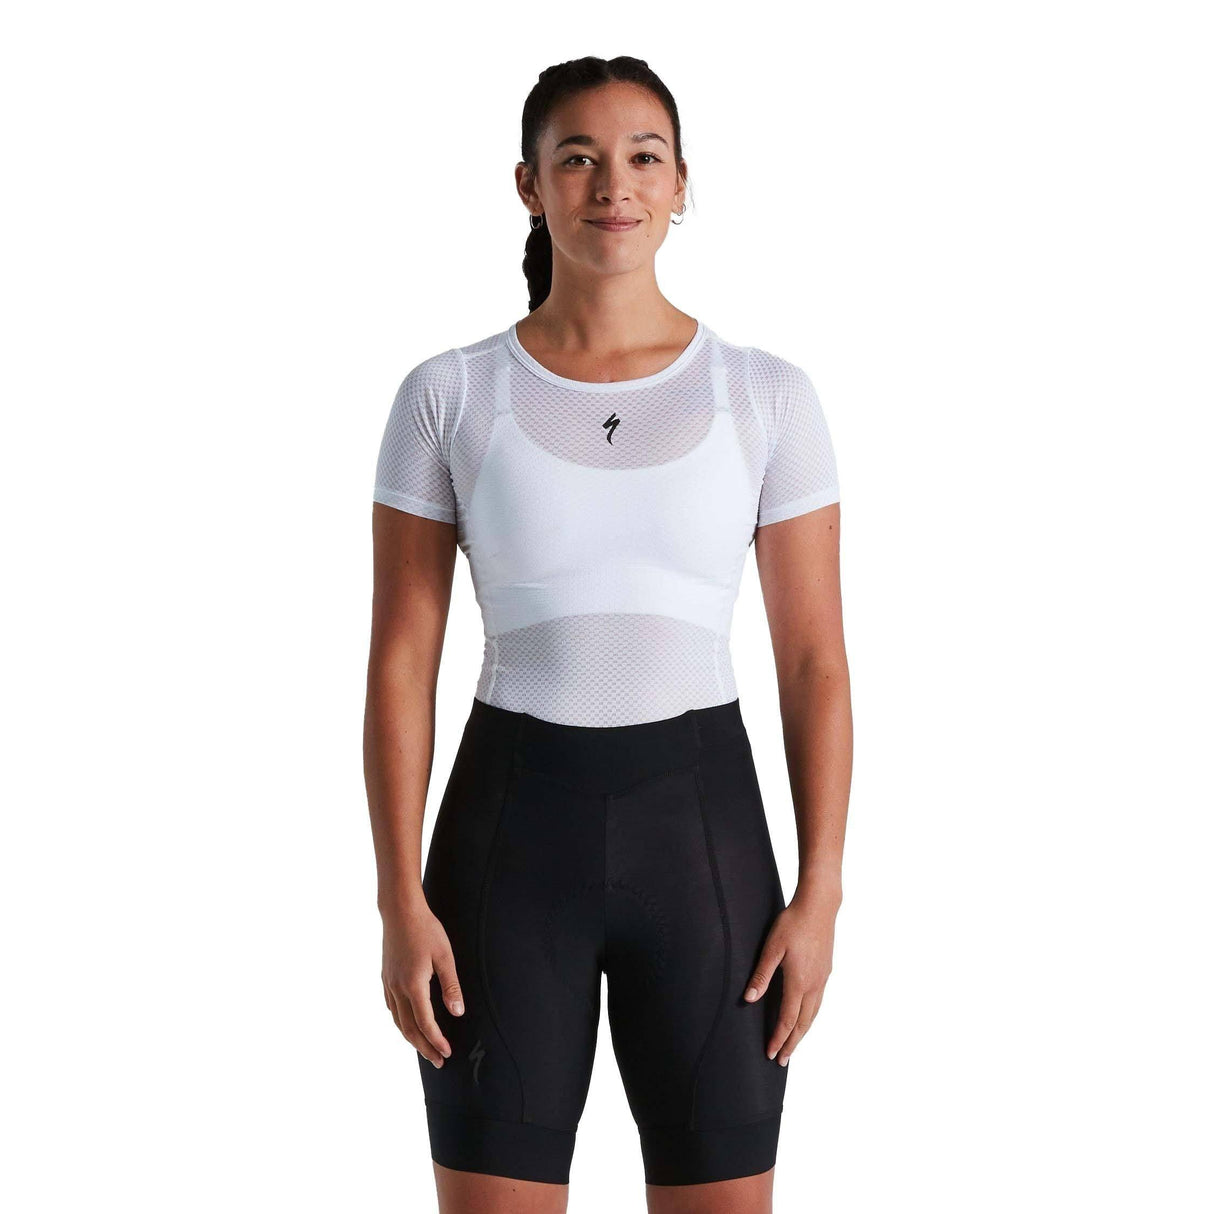 https://www.strictlybicycles.com/cdn/shop/files/specialized-women-s-rbx-shorts-strictly-bicycles-1_875660cf-5fa2-4782-83ba-8a70e38a9ad3.jpg?v=1687661641&width=1214